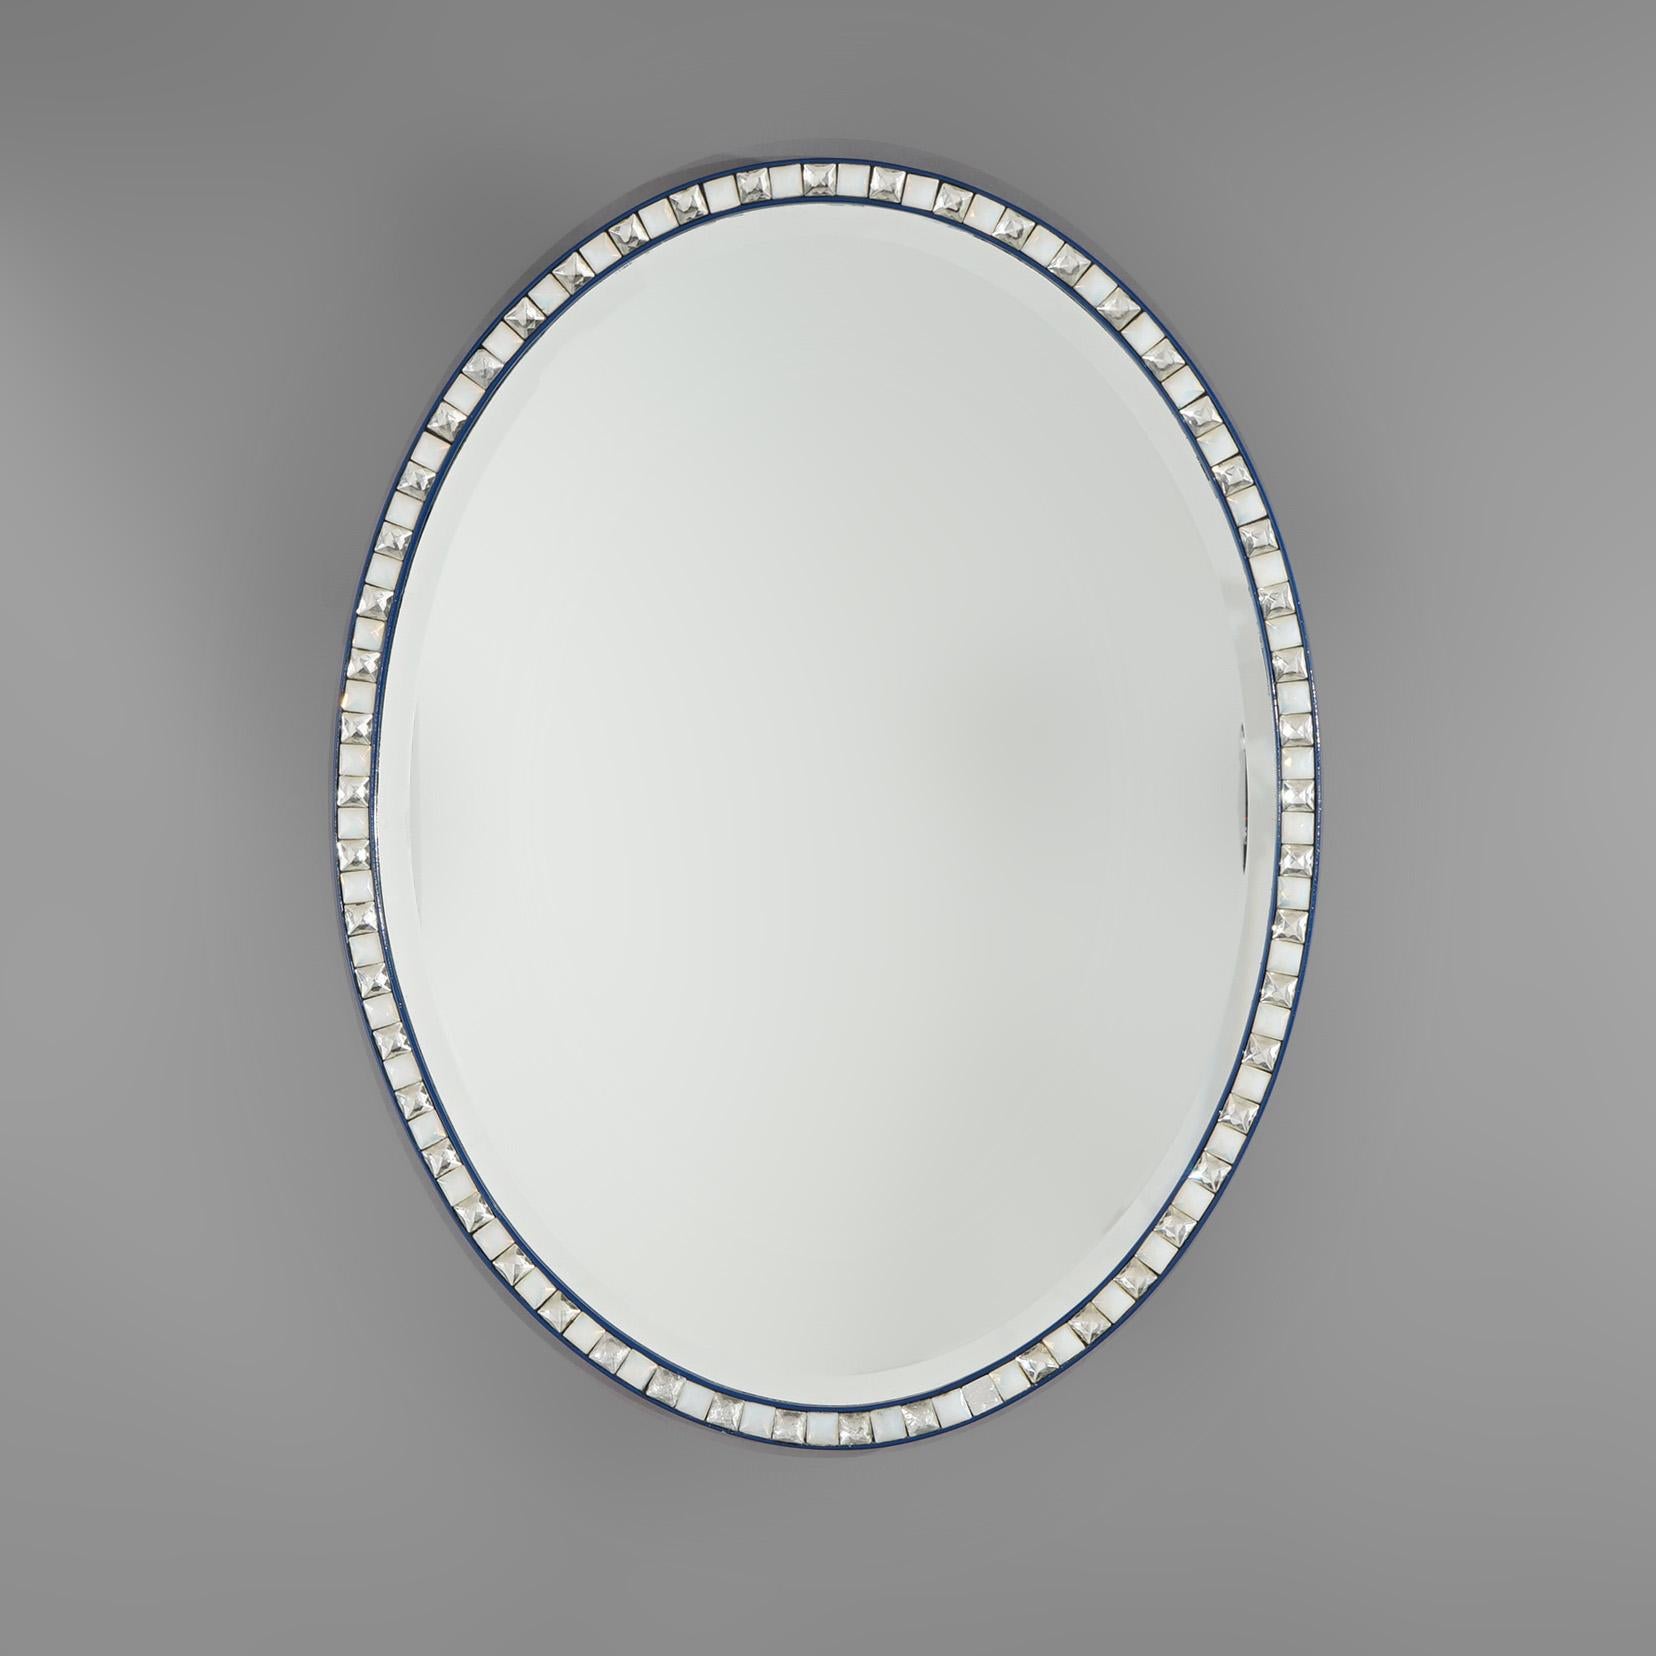 Hollywood Regency Sapphire & Jeweled Oval Wall Mirror 20thC

Measures- 39.25''H x 30.5''W x 1.5''D; 39'' x 30'' sight